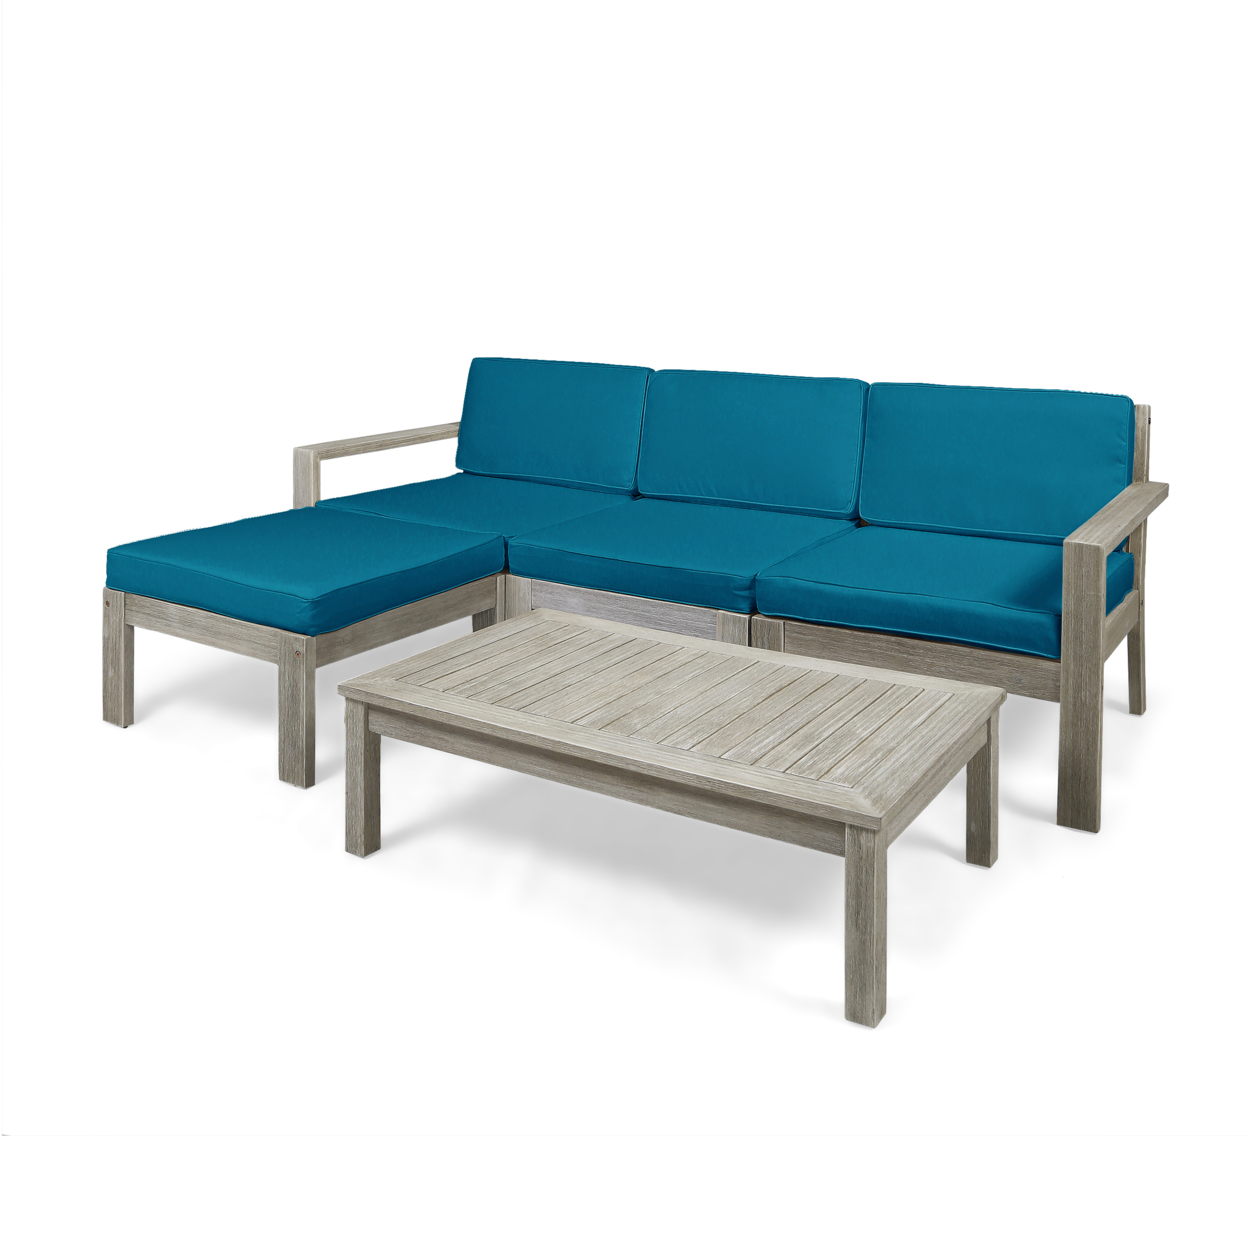 Isabella Ana Outdoor 3 Seater Acacia Wood Sofa Sectional With Cushions - Wire Brushed Light Gray Wash + Cream